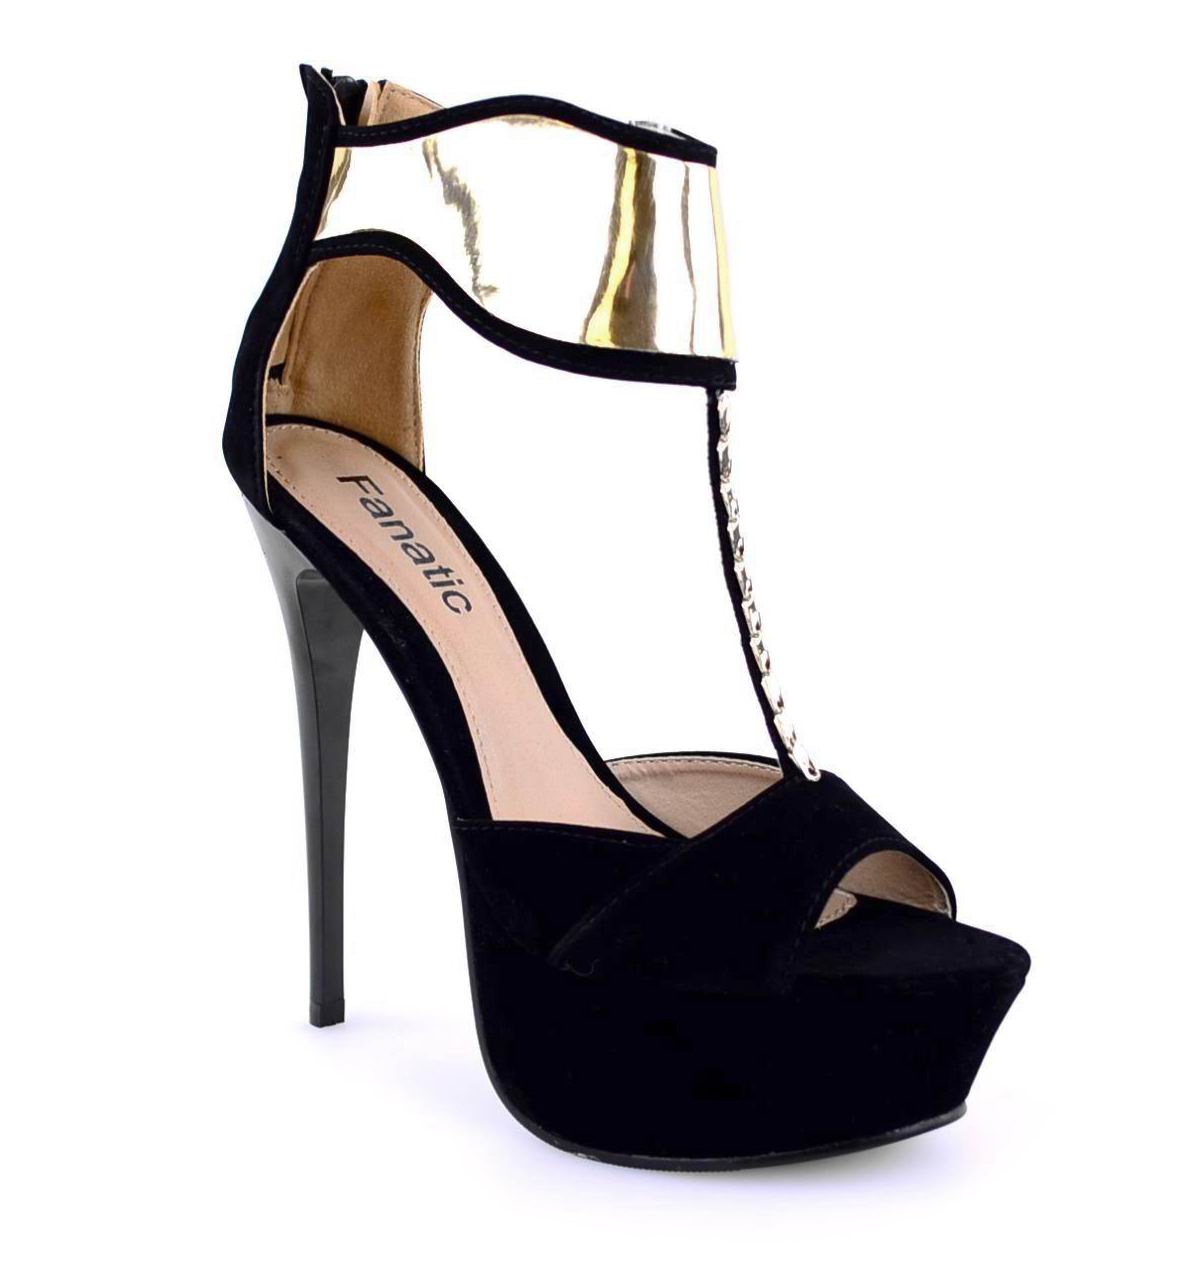 LADIES WOMENS HIGH HEEL STILETTO GOLD ANKLE STRAP PARTY EVENING SHOES ...